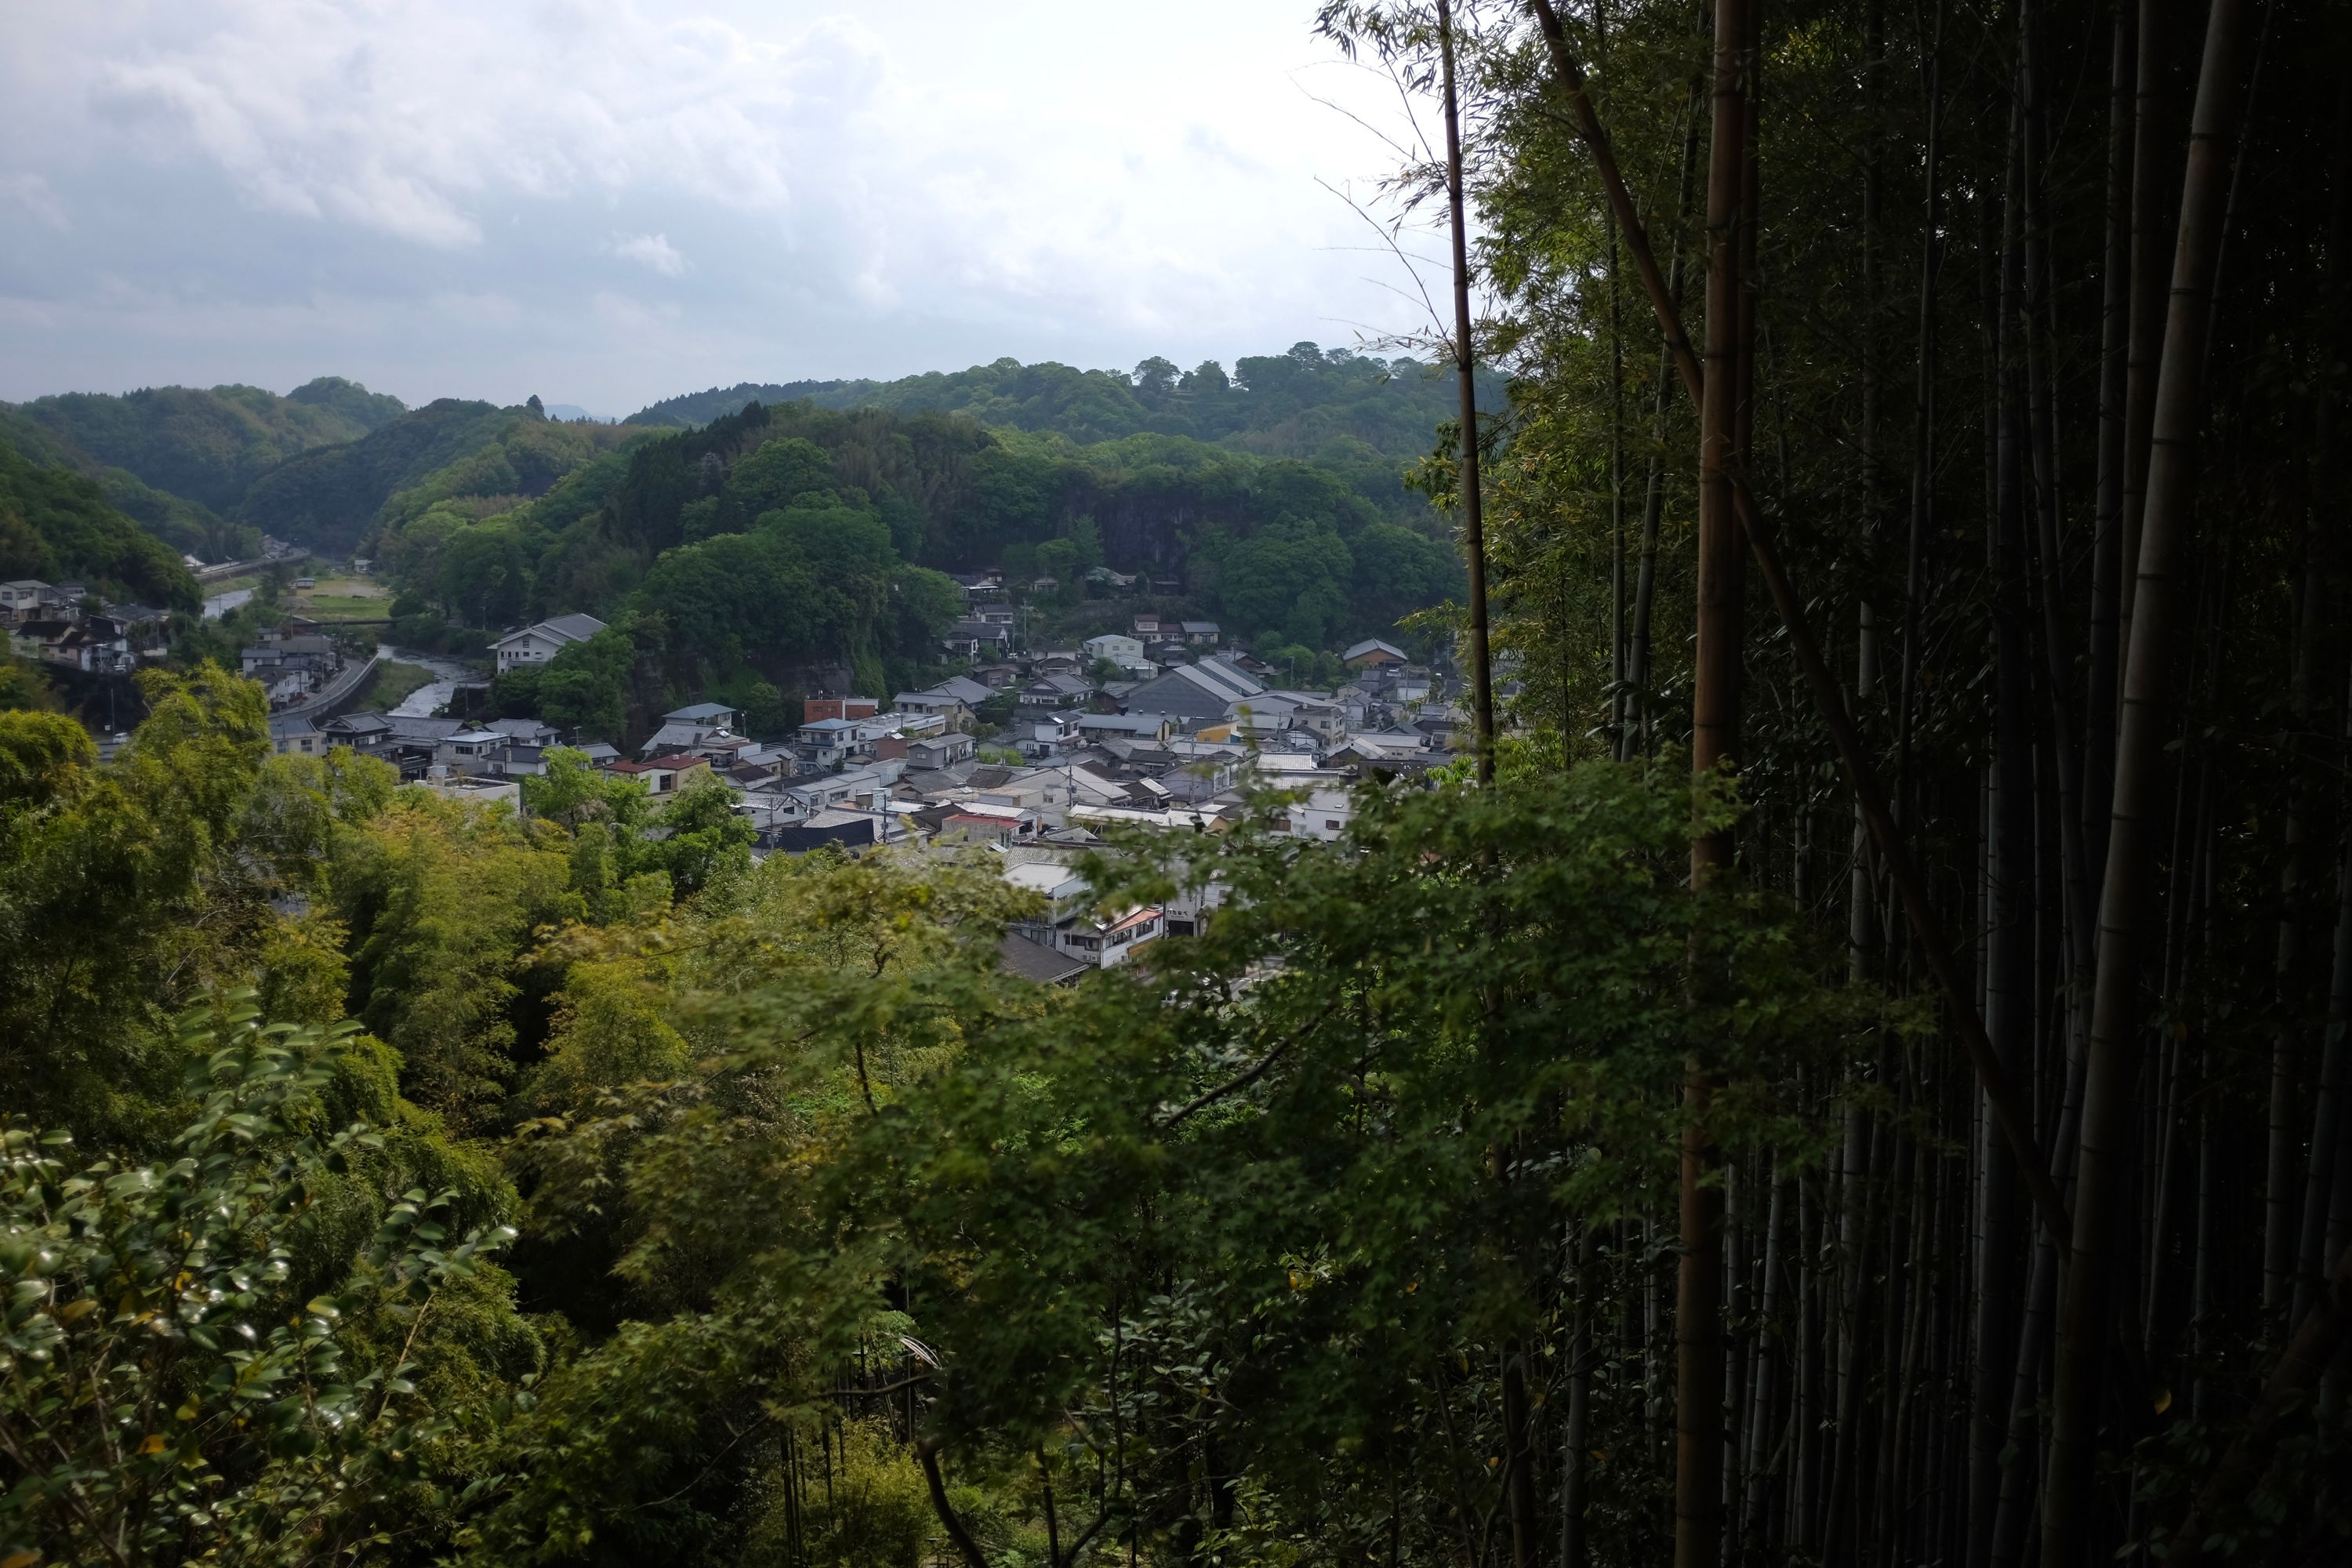 View of a small town from atop a hill covered in dense vegetation.